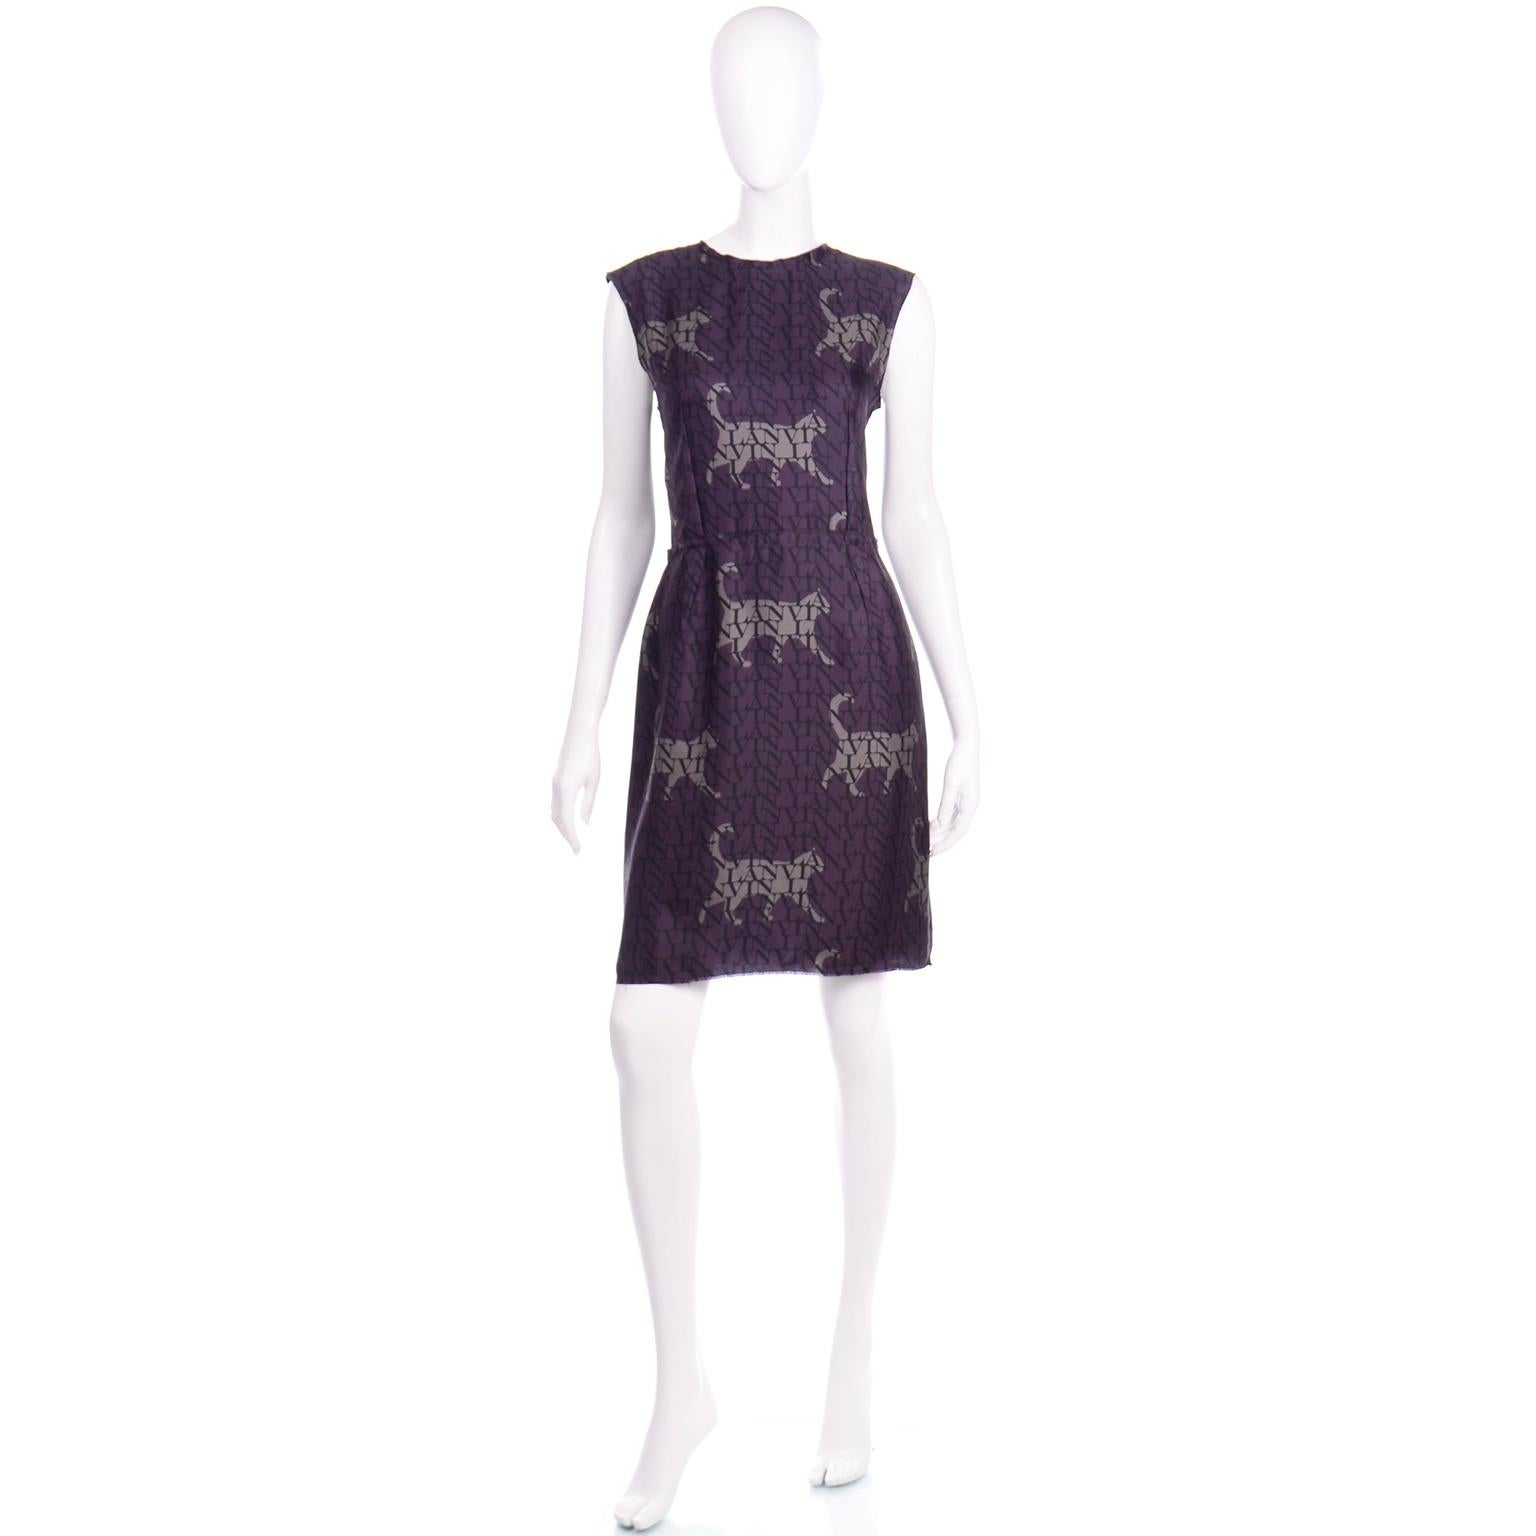 This is such a beautiful Lanvin silk dress with a monogrammed logo print and cat figure outlines. This dress would be easy to dress up for a special evening out or wear it with casual shoes for a lunch date! The base color is purple and the print is